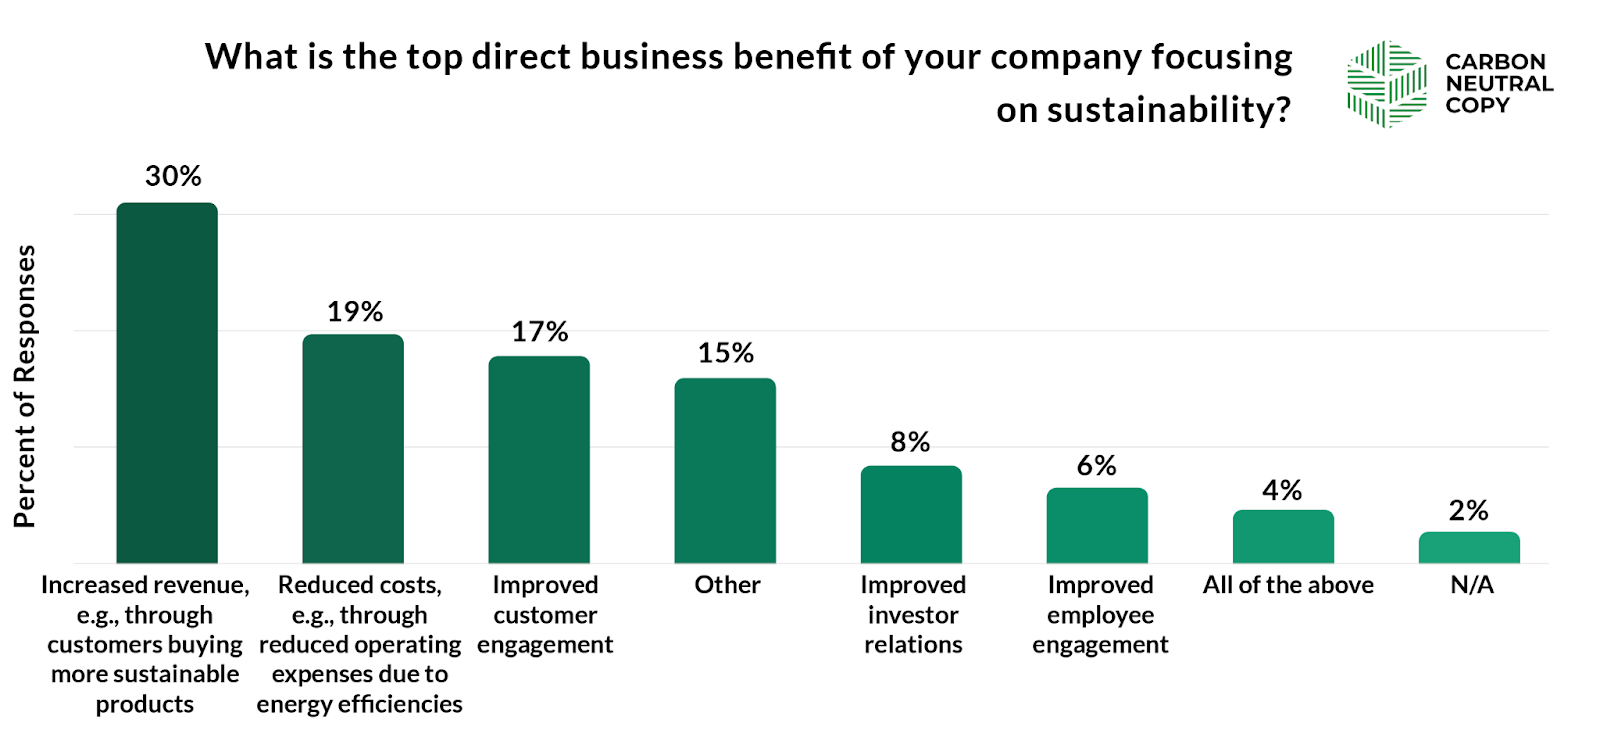 Chart showing survey results for top direct business benefits of sustainability, with increased revenue and reduced costs as top answers